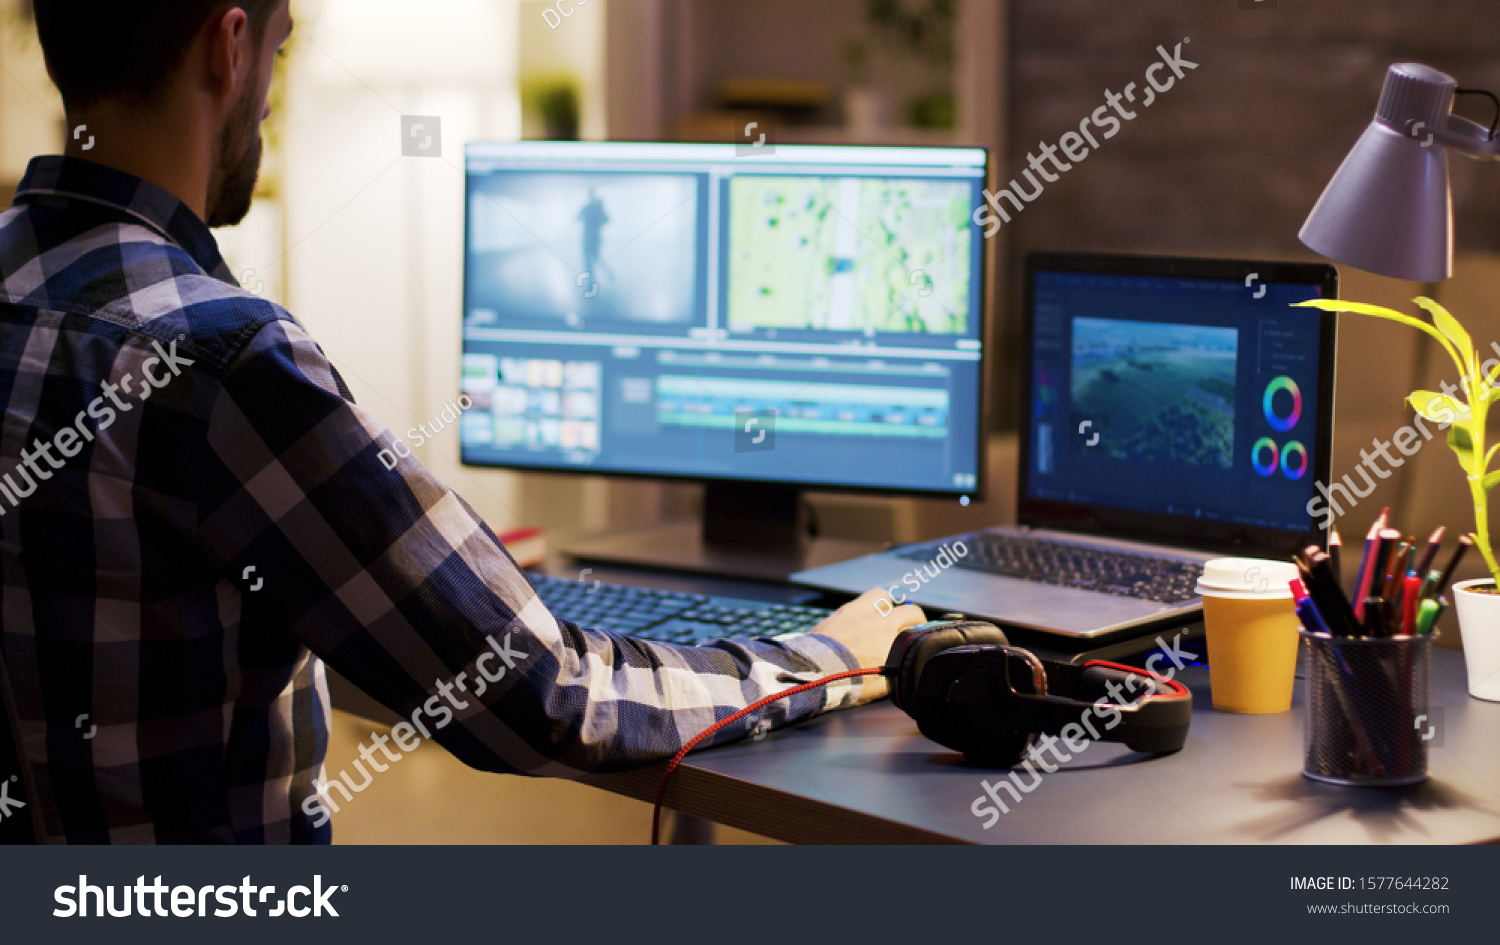 Movie maker editing a film using modern software for post production. Young videographer. Home office. #1577644282